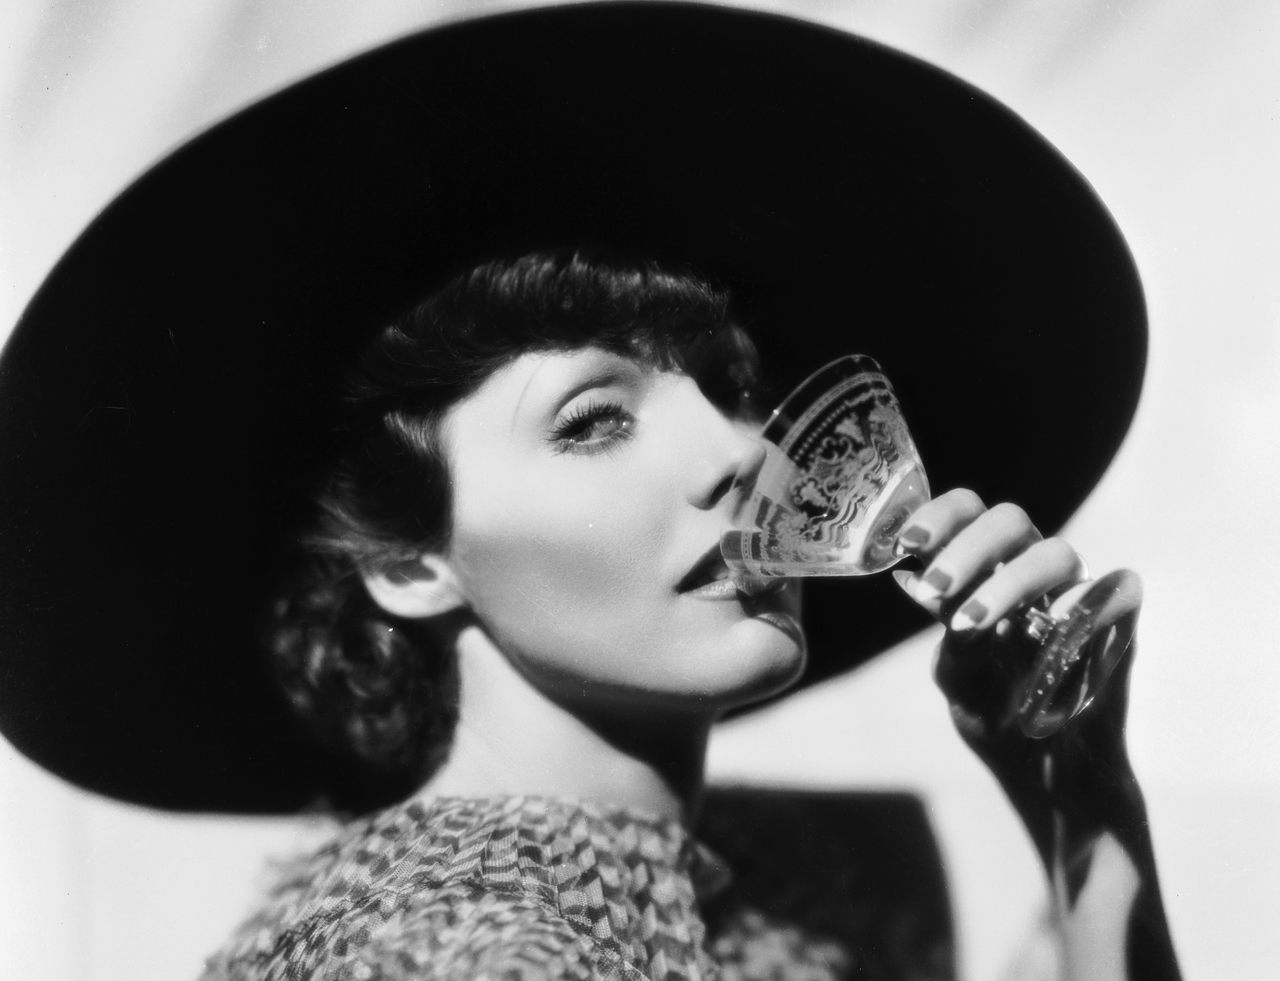 People spent significant time and effort making non-alcoholic drinks glamorous. 